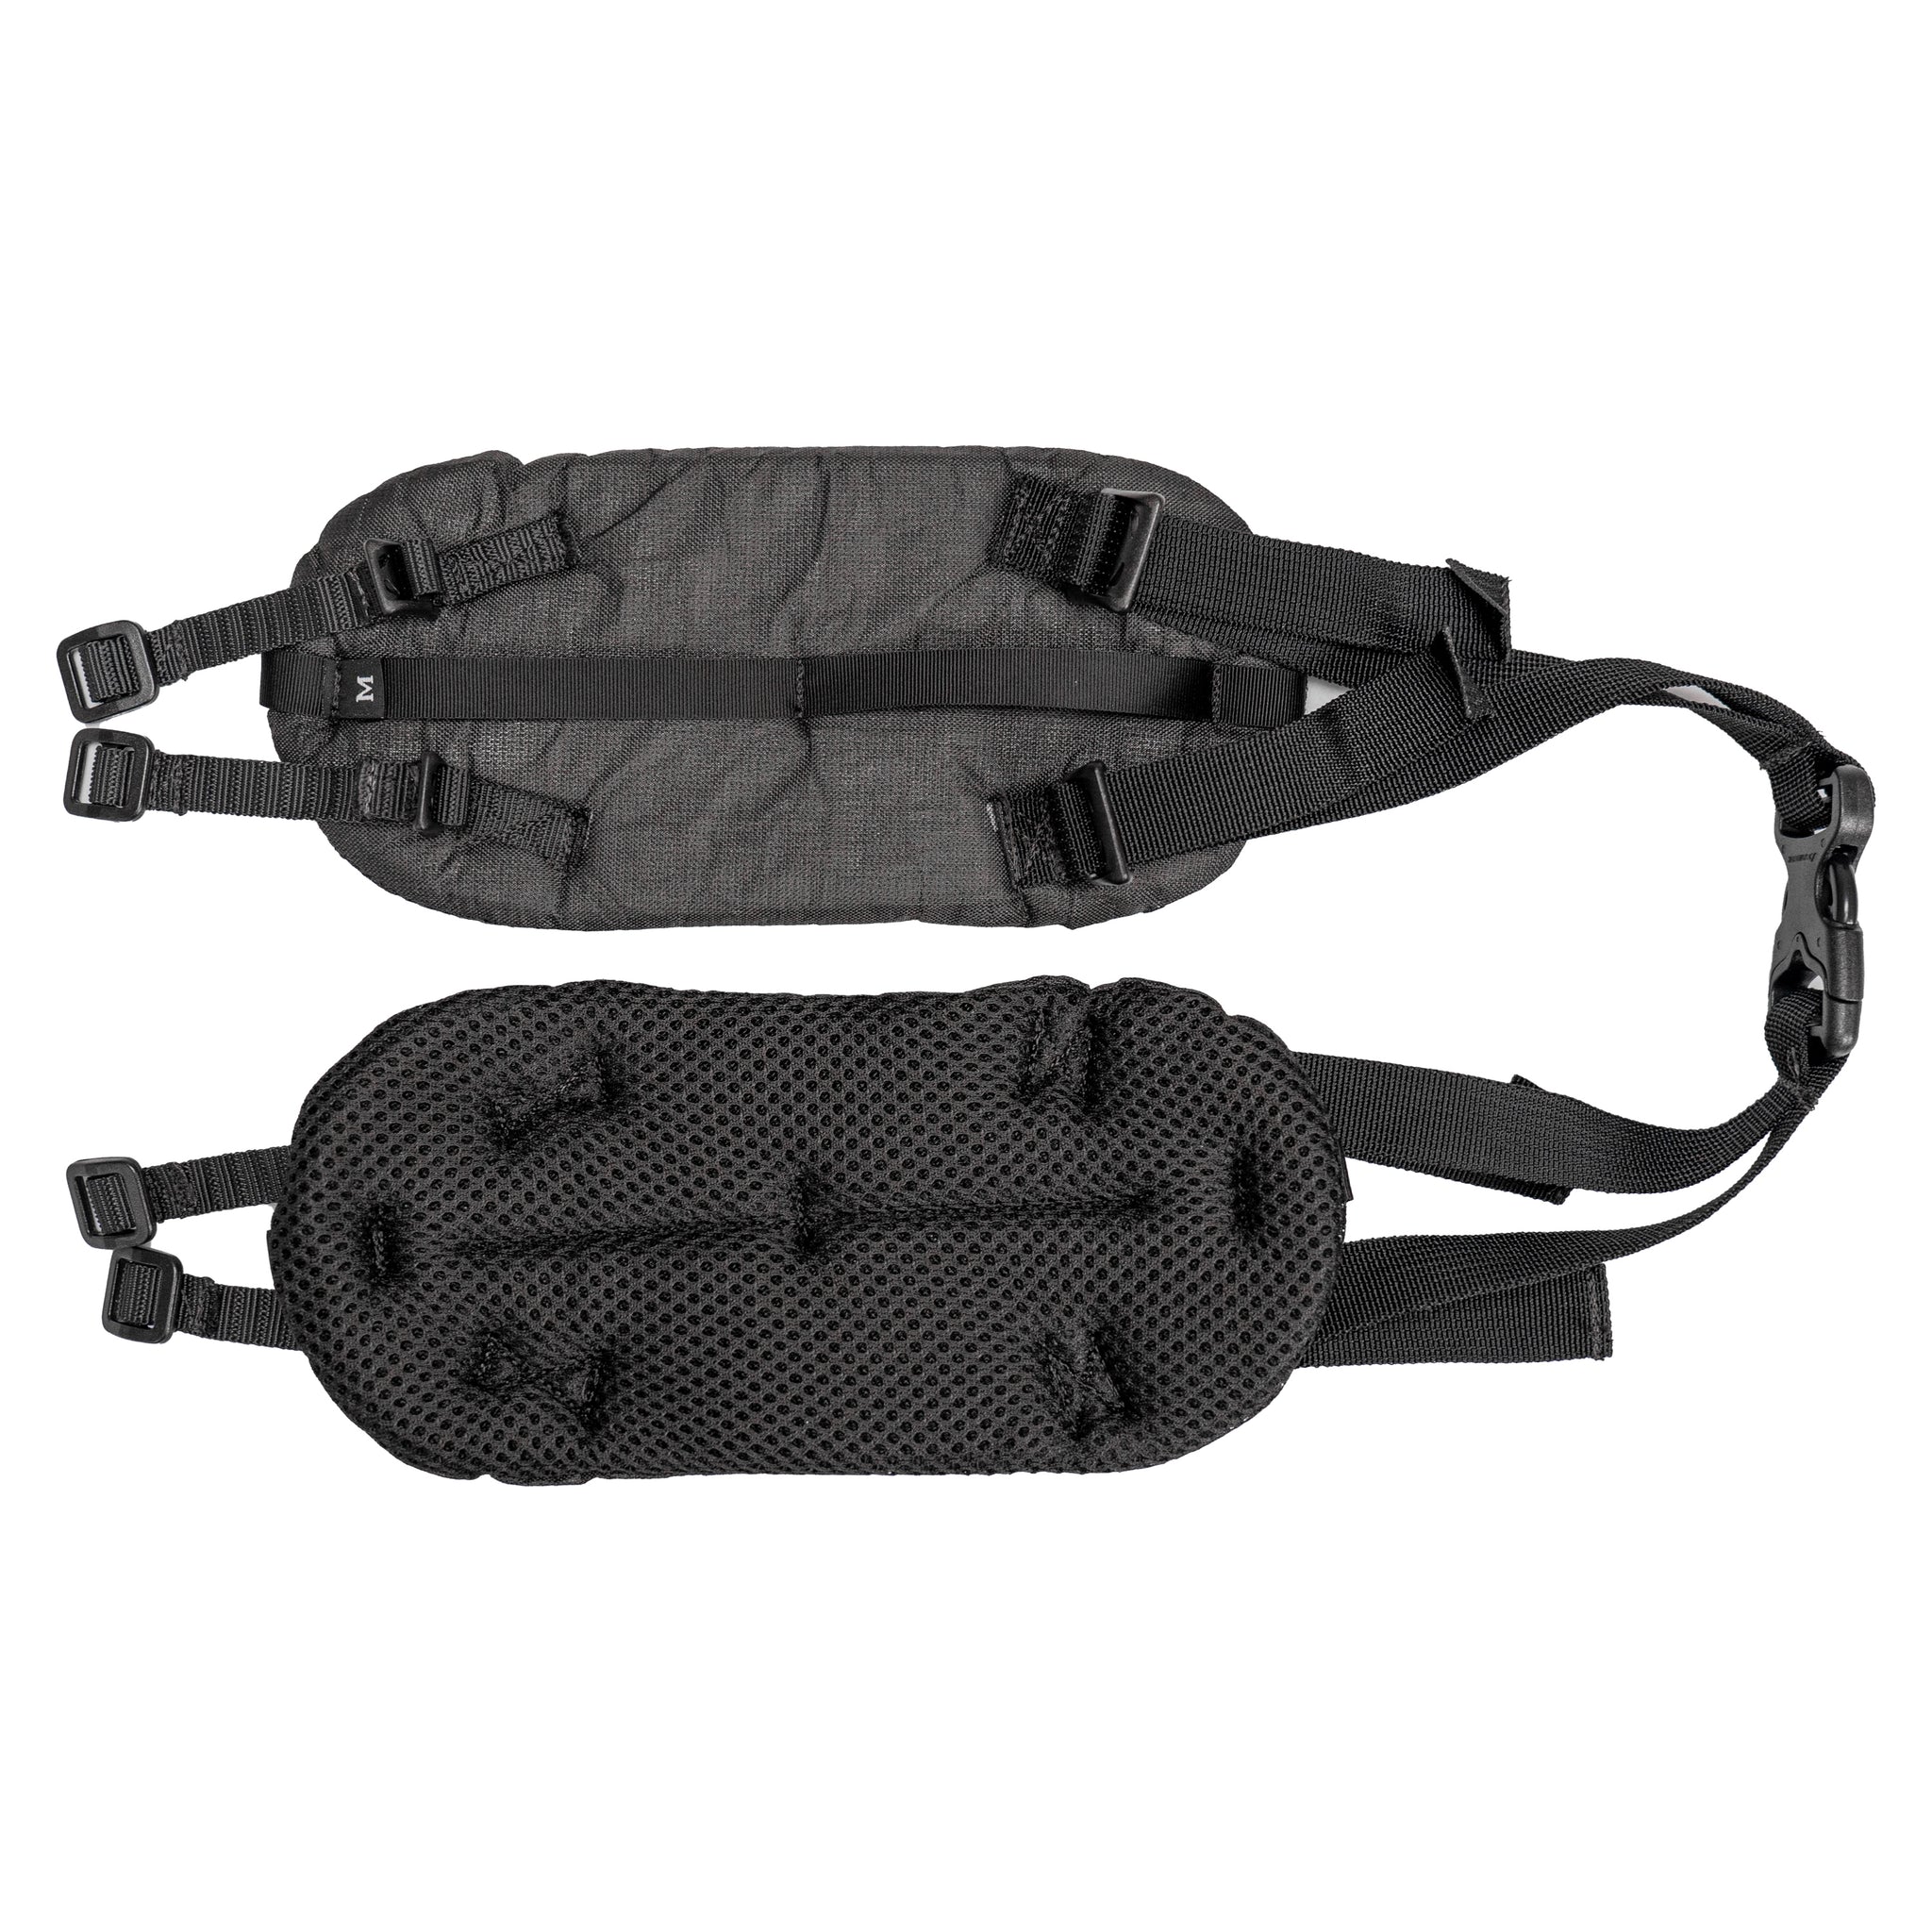 Backpack Straps Replacement Padded Chest Strap Replacement Repair